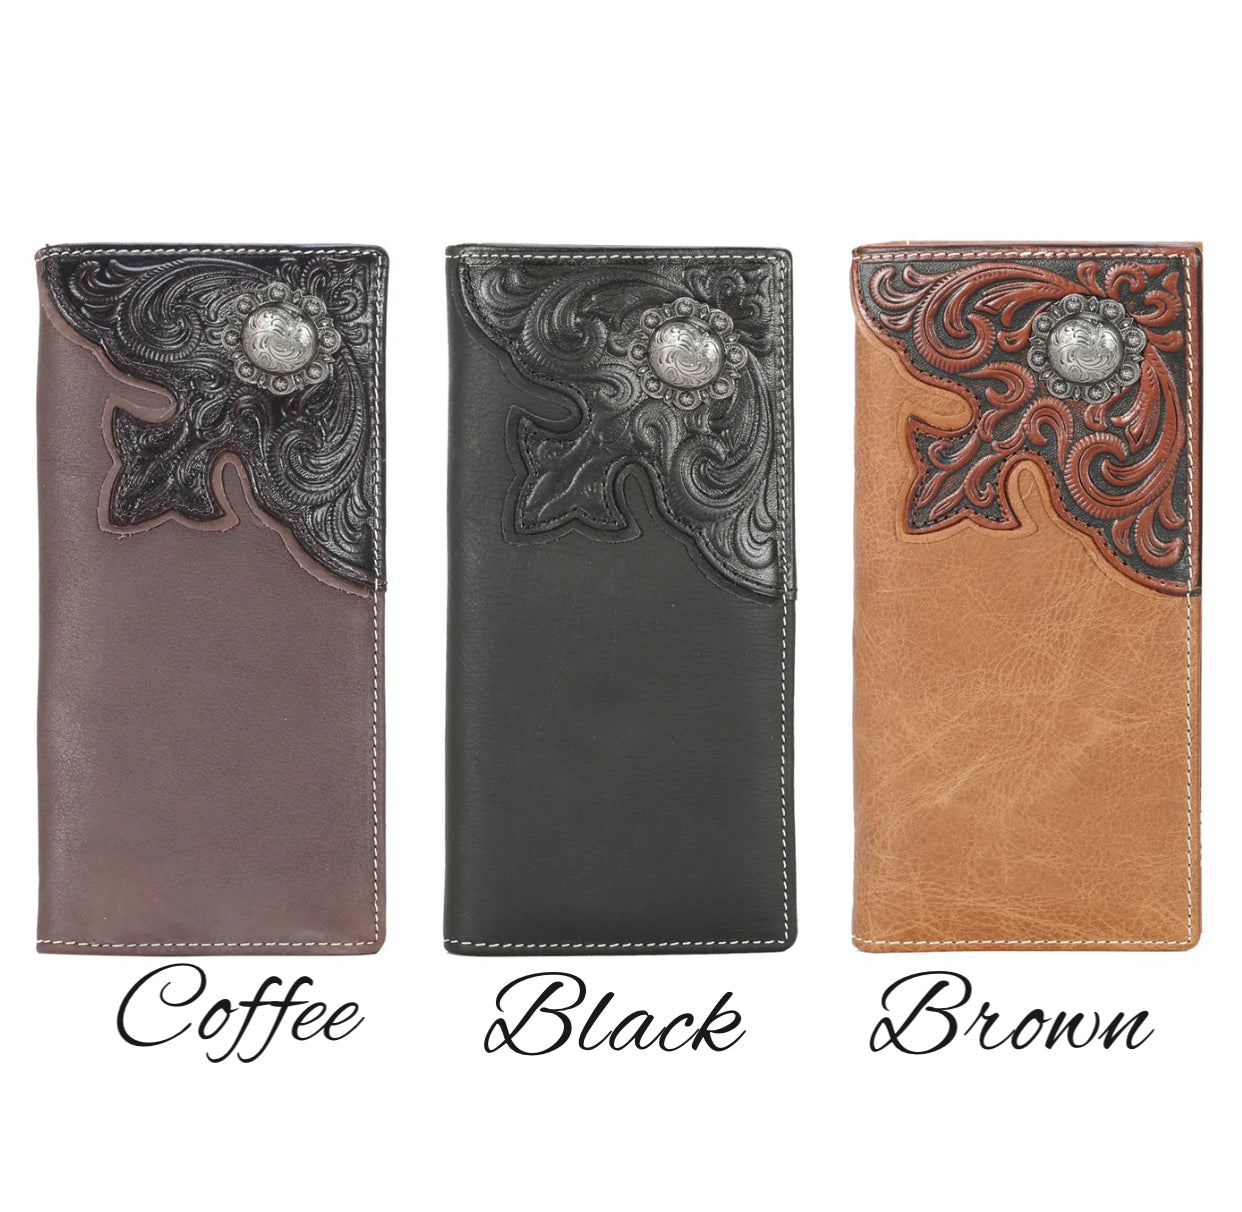 MWLW009 - Genuine Tooled Leather Collection Men's Wallet